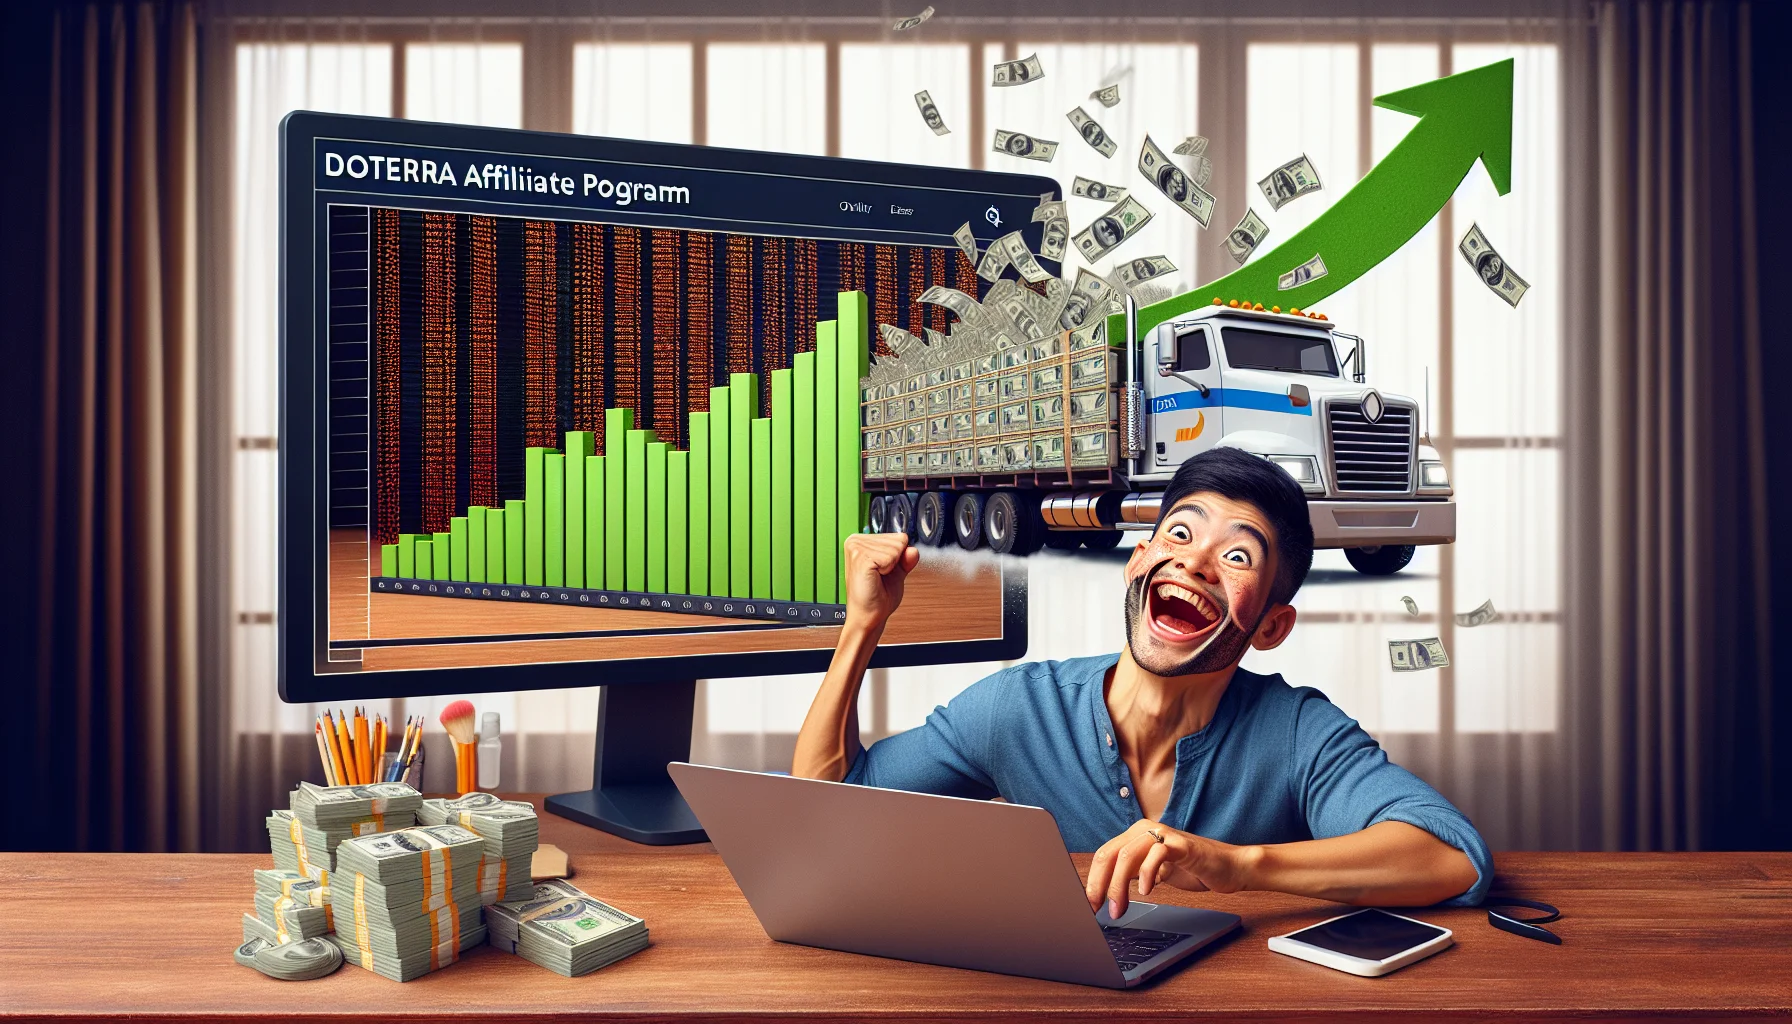 Visualize a humorous but believable scenario symbolizing the doterra affiliate program and its association with online monetary earnings. A computer screen displays an animated bar chart graph rapidly increasing in numbers symbolizing profits. Alongside, there's a caricature of a person with a giddy expression, creating a humorous touch. The person is of South Asian descent and is seen working passionately on their laptop. In the background, a truck made of essential oil bottles, representing doterra, is unloading money. The setting should be in a familiar home office setup.